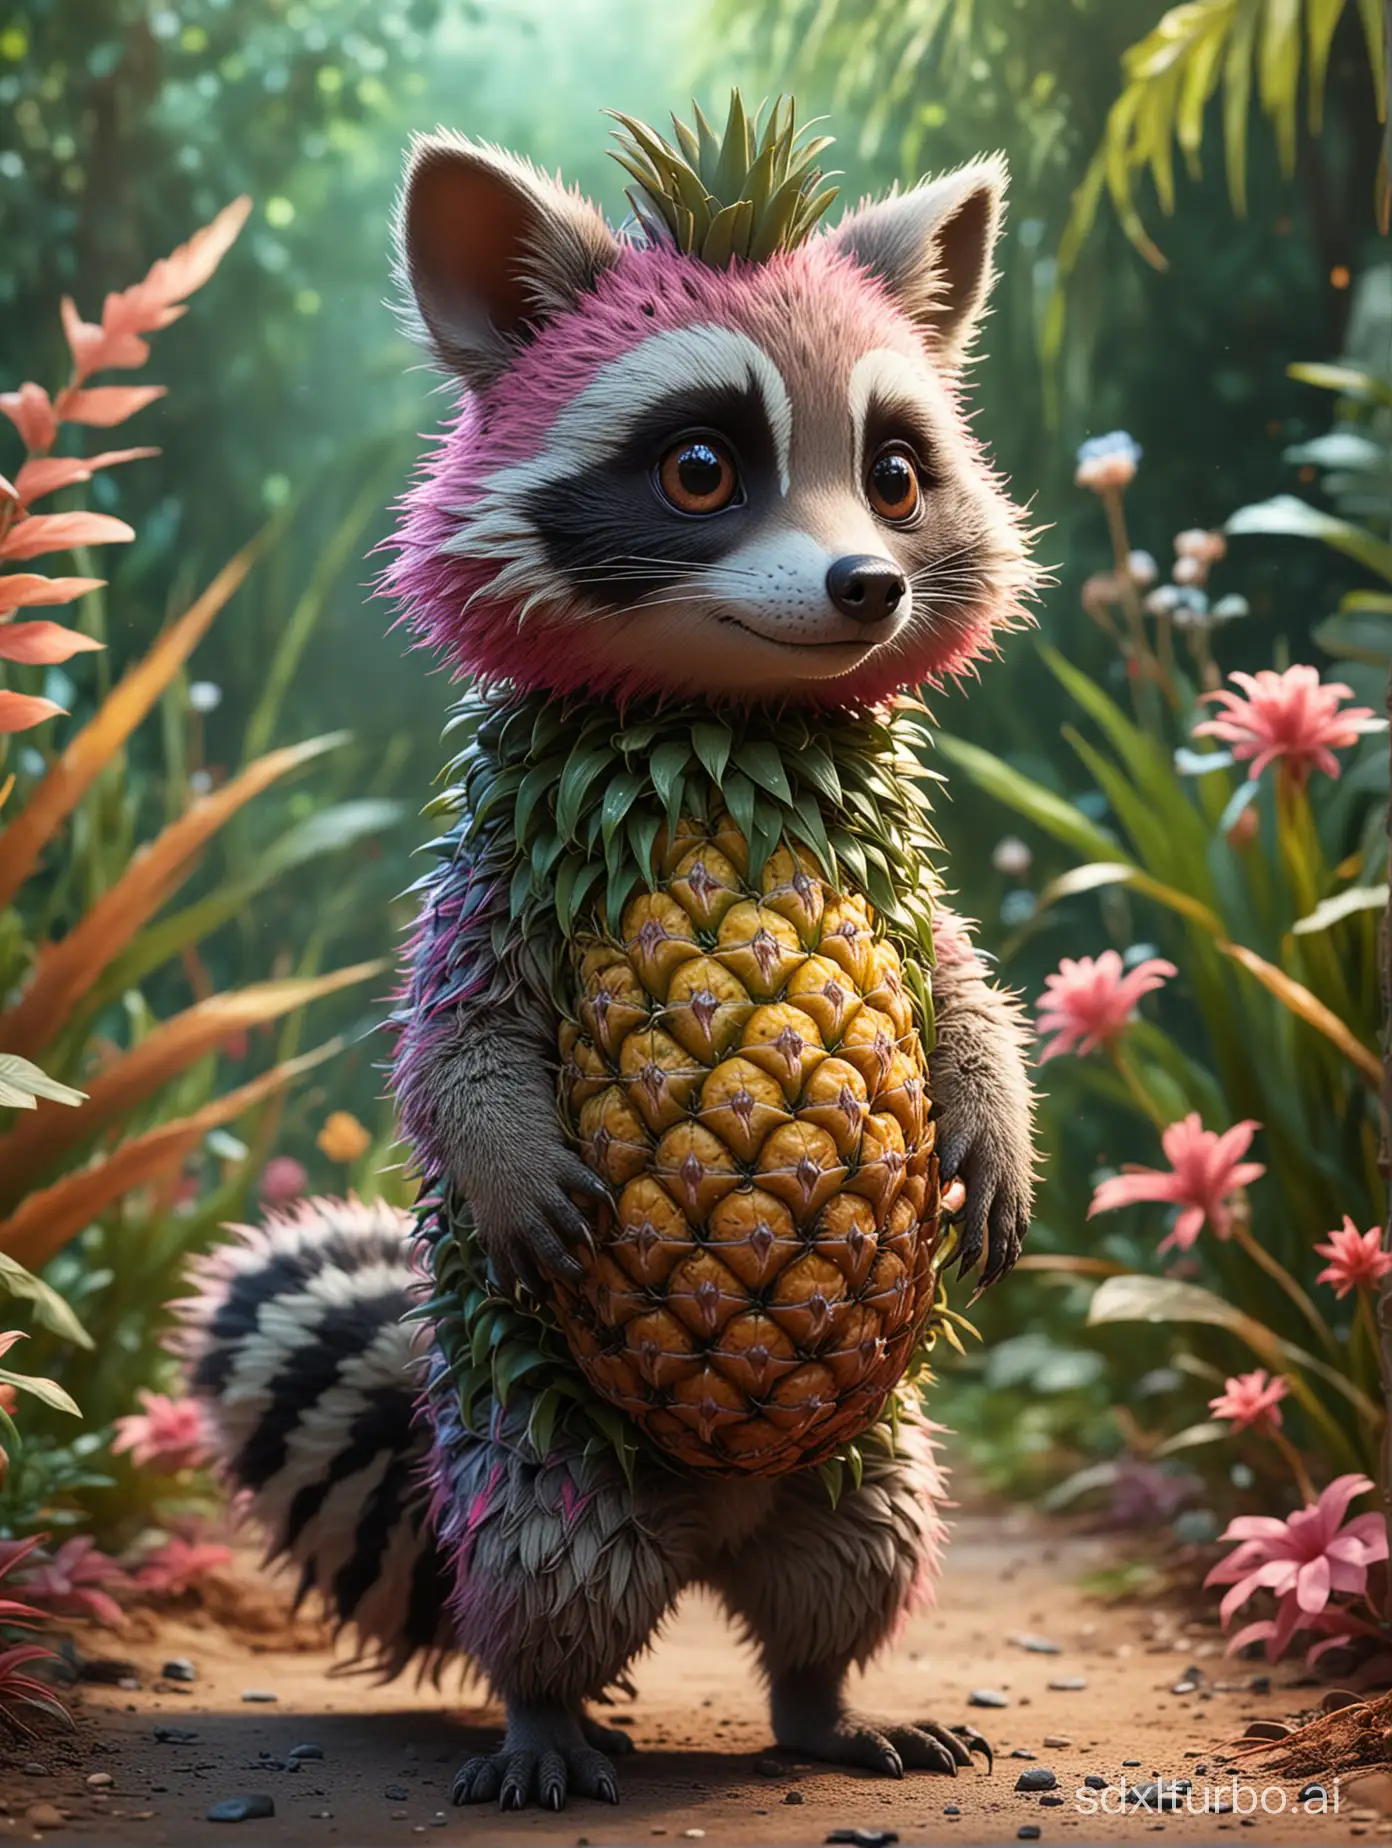 Visualize a fantastical creature blending the traits of a pineapple with pink skin and green-tipped fronds with a cute raccoon in the style of Pixar animation, standing upright. This creature is set against a contrasting background that does not match its color palette, avoiding blending with the creature's vibrant hues. The background should be a softly blurred natural setting, enhancing the focus on the creature. The creature's detailed skin texture, highlighted with digital art finesse and high-quality photography detail, reflects a high degree of surreal realism mixed with anime cuteness. The setting is vertical, ensuring an immersive visual experience that invites viewers to explore the harmony between nature and fantasy. Light and texture are used creatively to emphasize the vivid details of the creature, capturing its essence in a holographic glow. The detailed focus on the creature's expression, posture, and skin texture against the dynamic range of colors and clear background aims to evoke tranquility and wonder in a surreal yet captivating landscape.